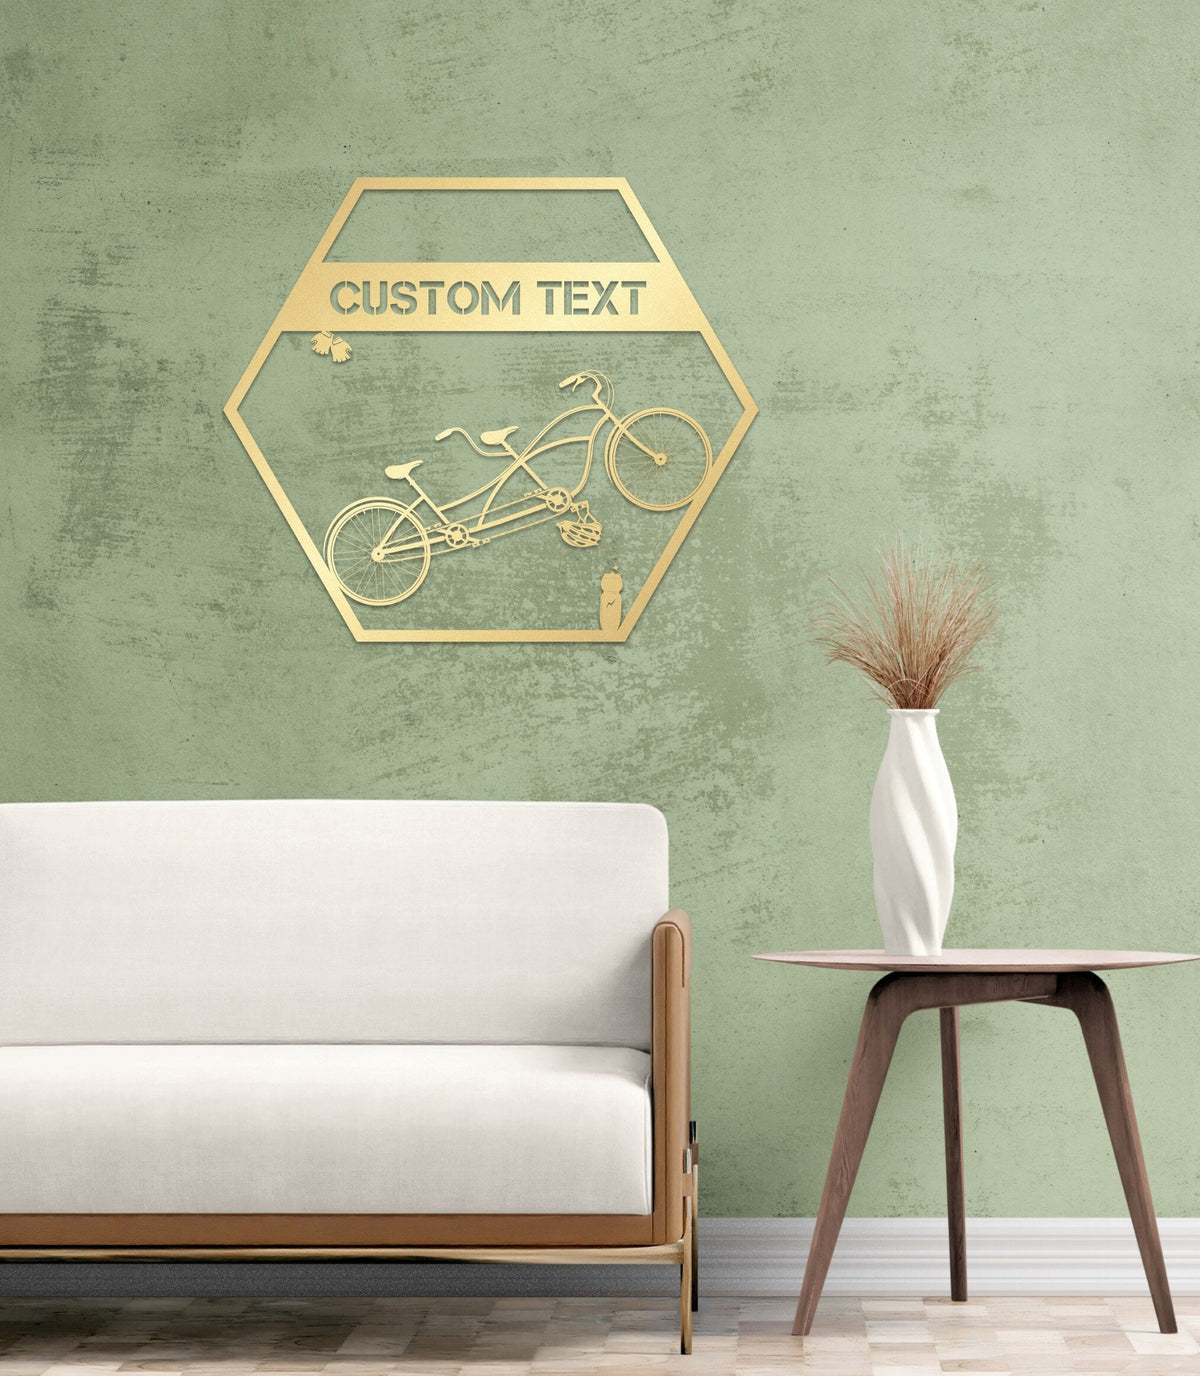 Personalized Metal Bike Wall Art Bicycle Custom Metal Wall Decor Gift For Cycling Lovers